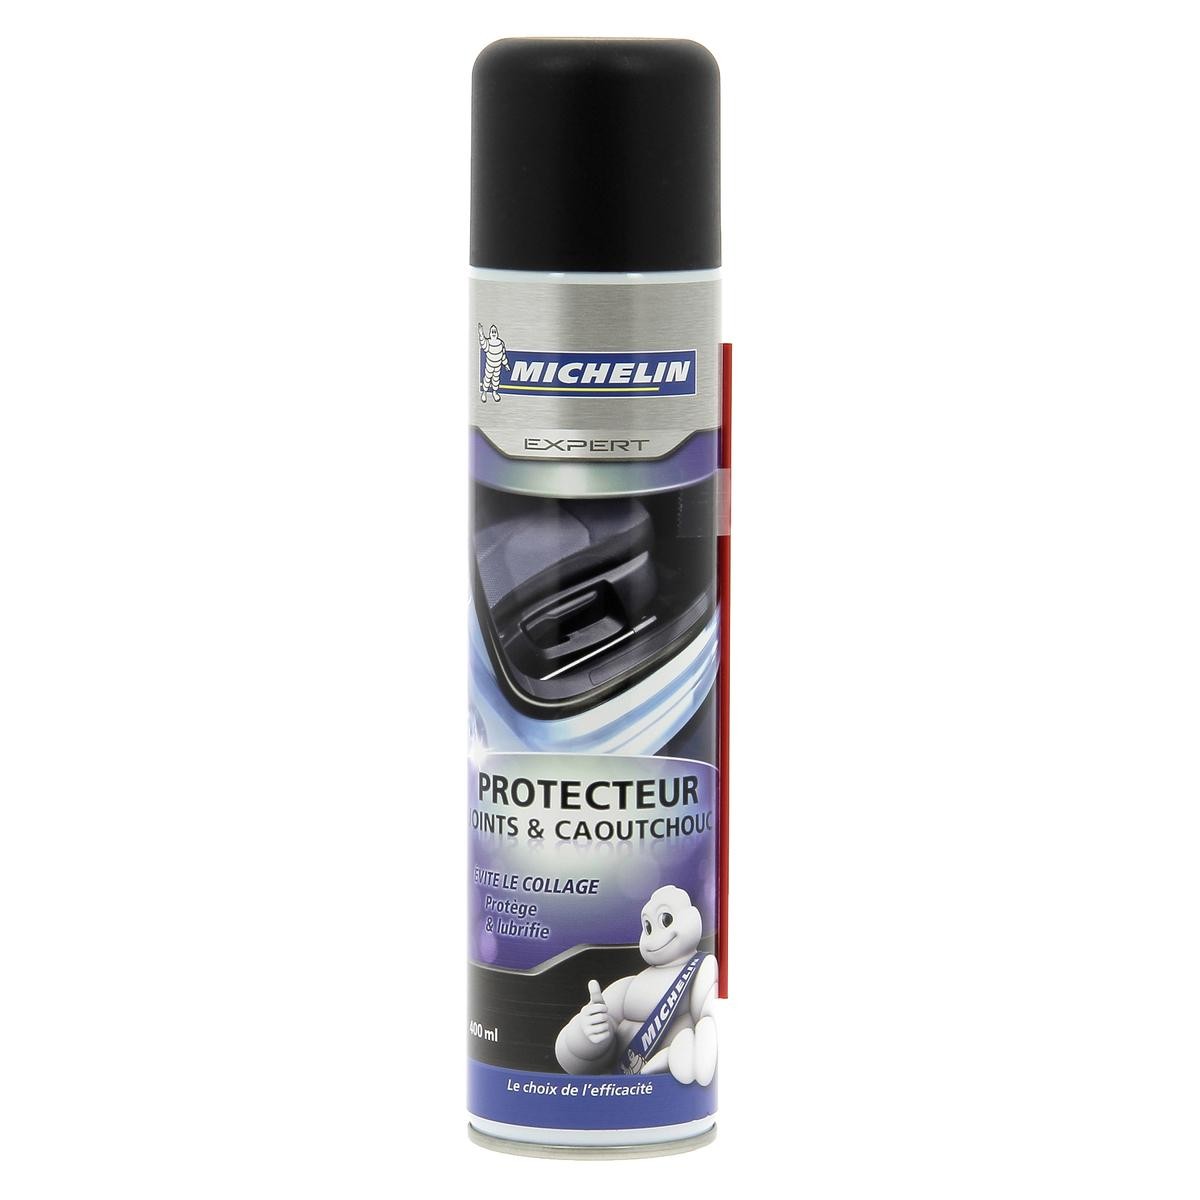 Michelin Expert aerosol, Capacity: 400ml Rubber Care Products 009455 buy